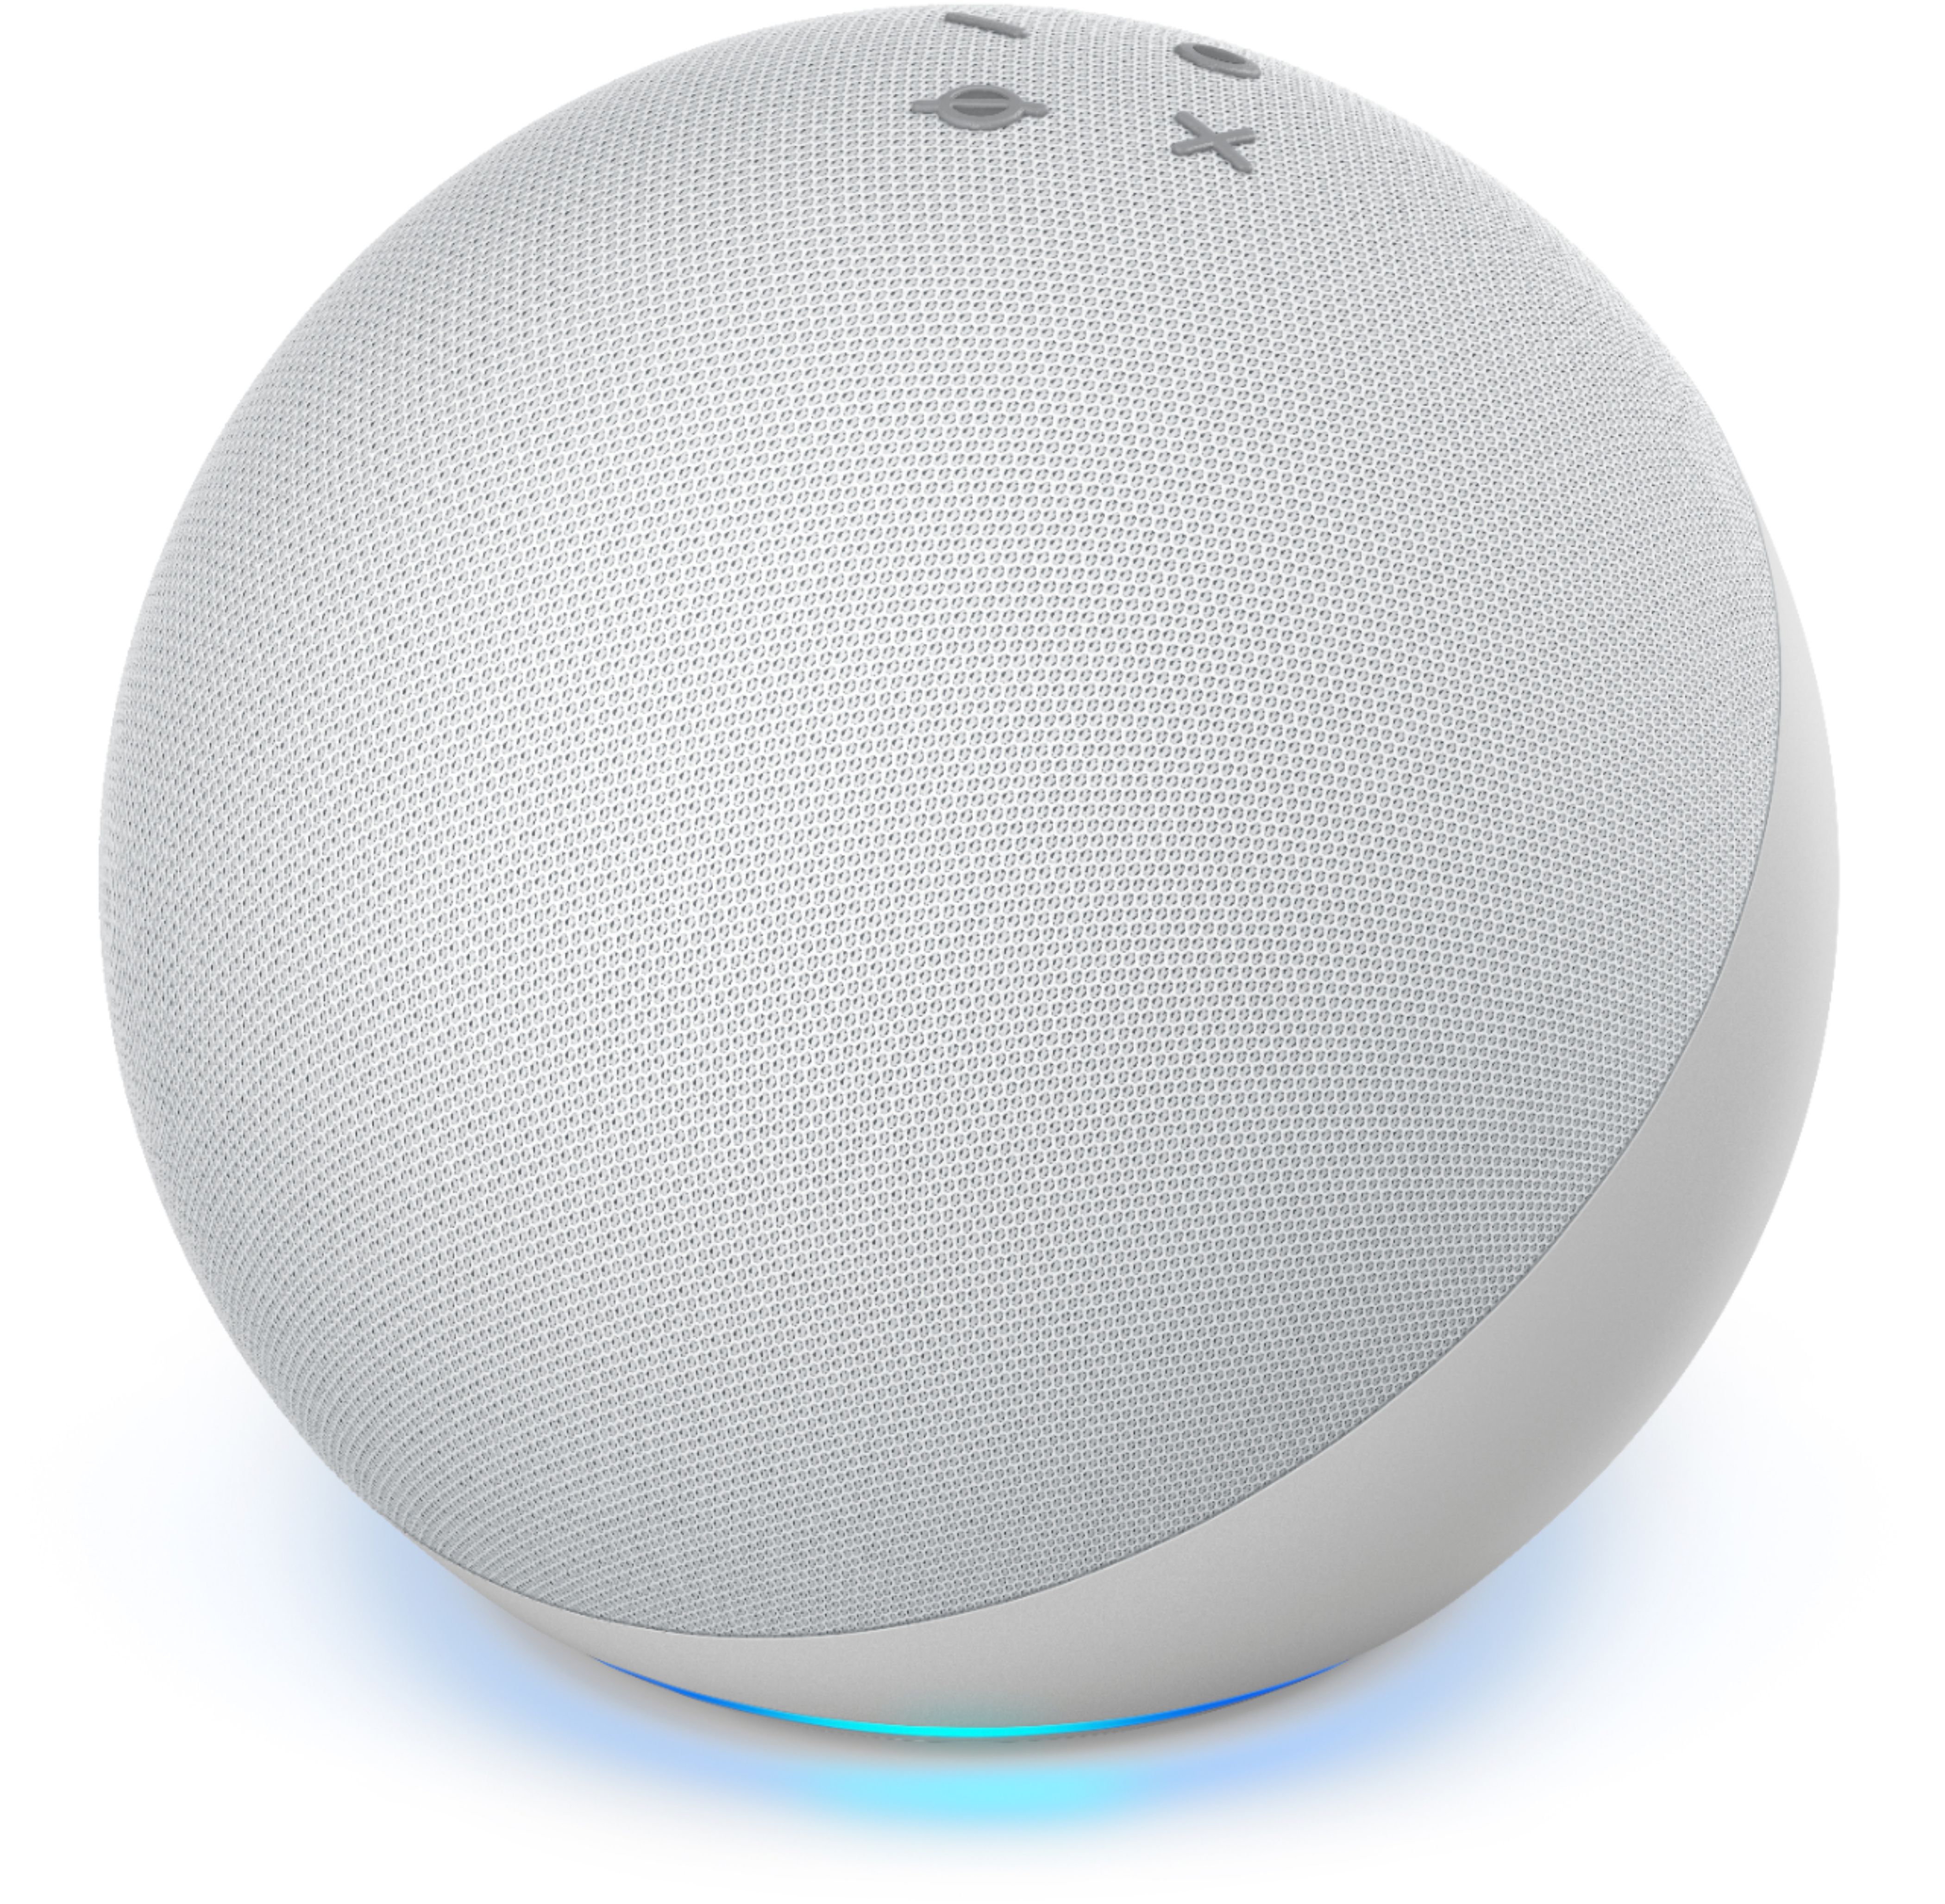 Echo Dot 4th-Gen w/ Free Smart Bulb on sale for $19.99 — New Lowest  Price Ever